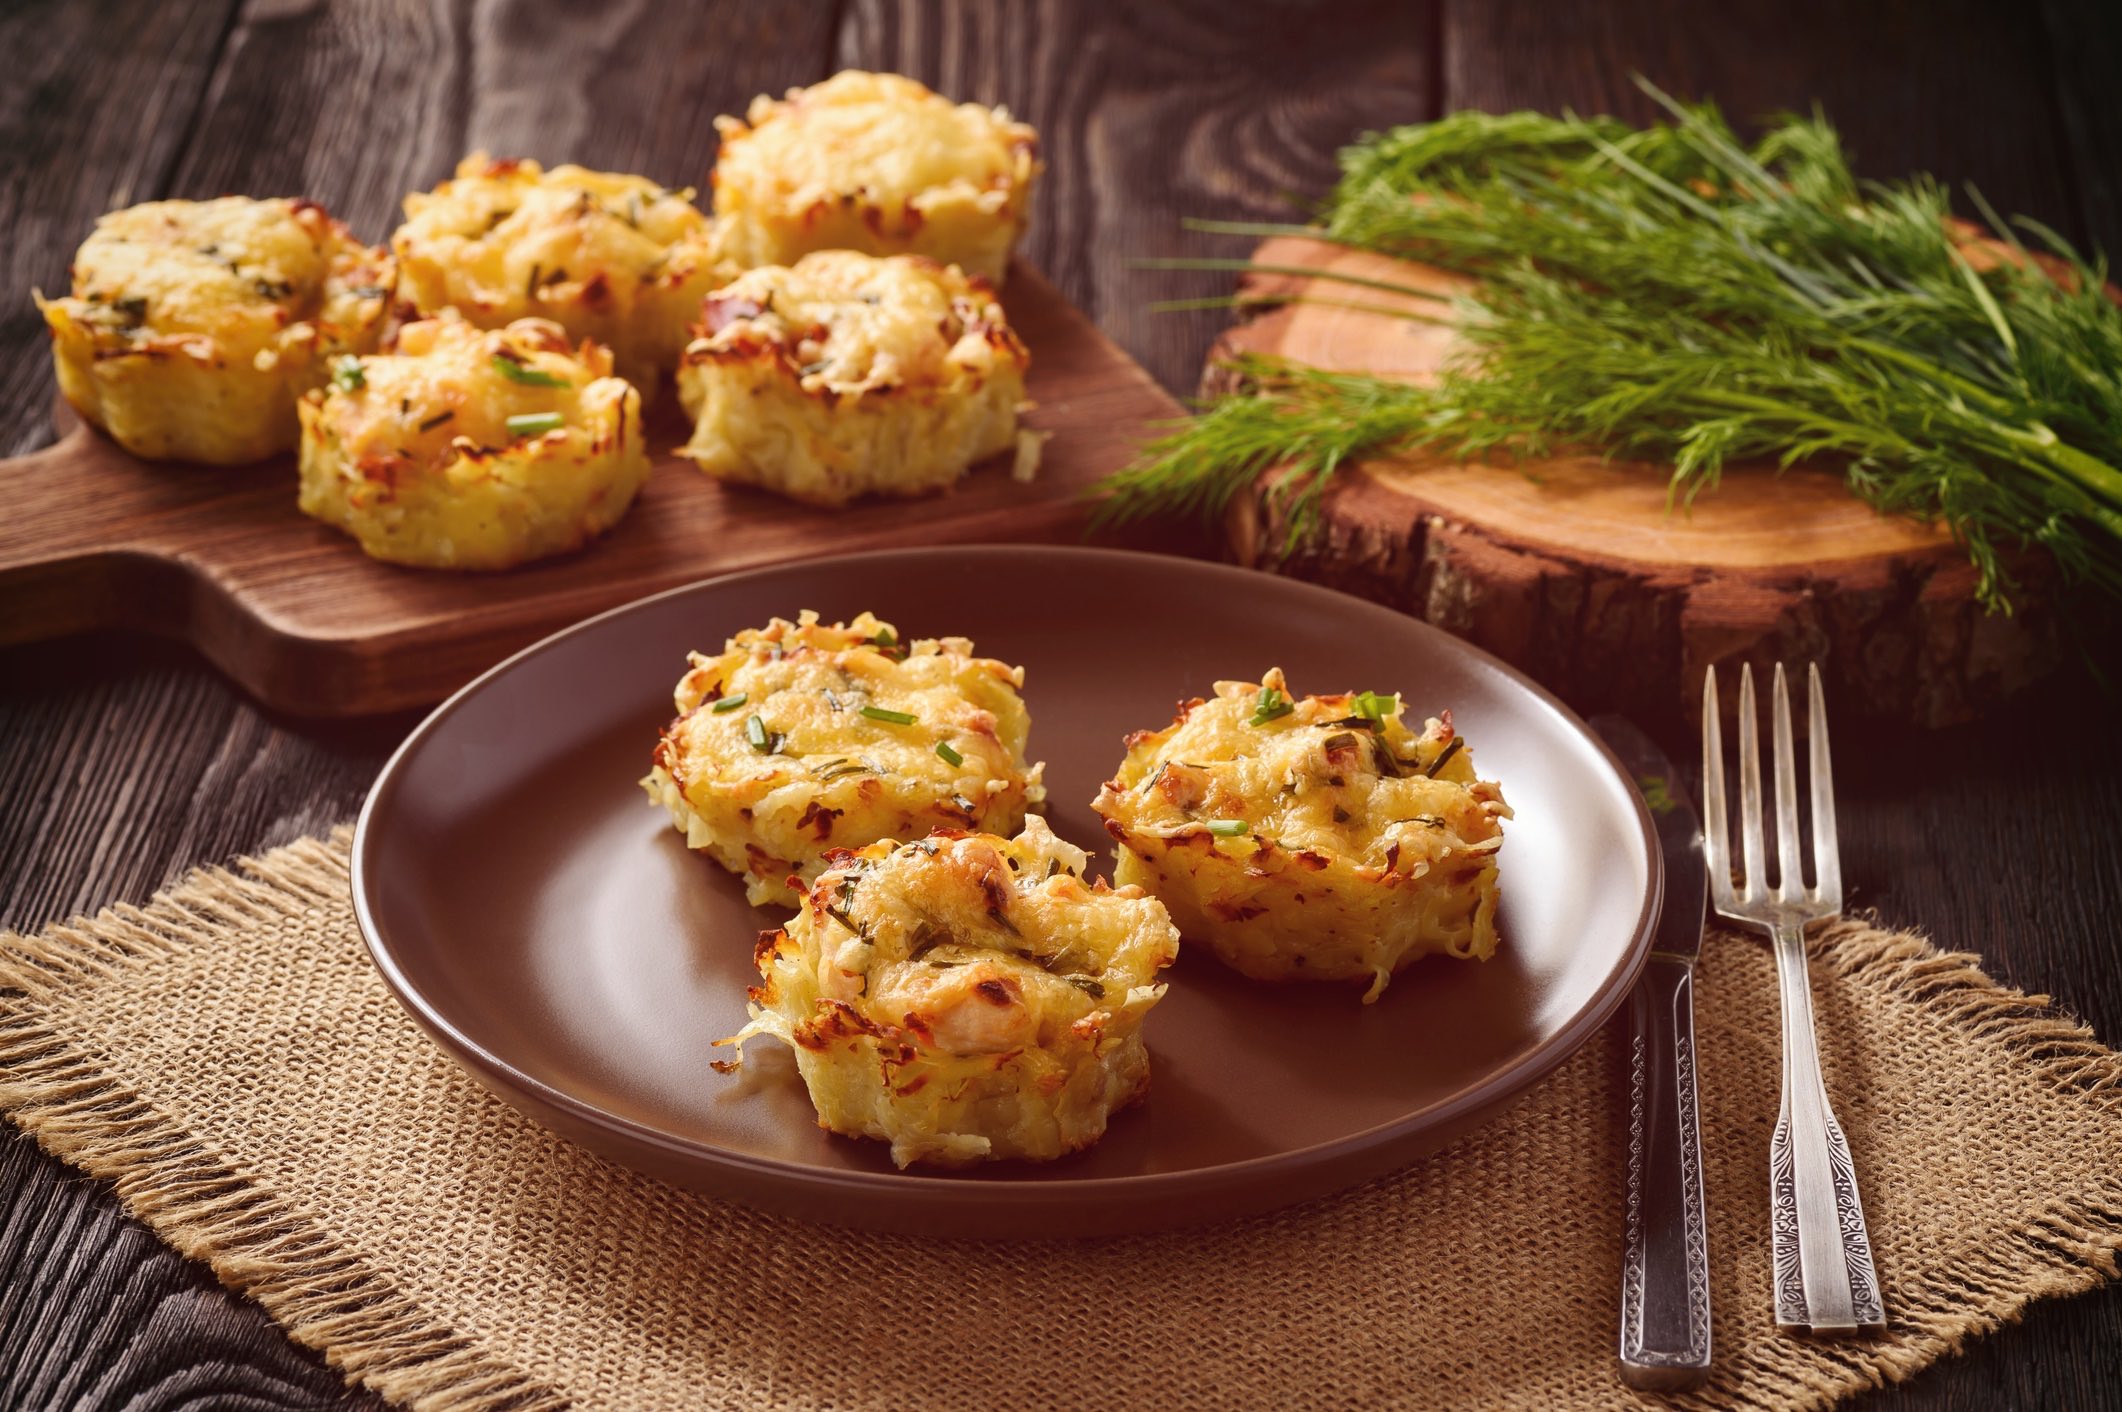 Potato muffins with chicken and chives